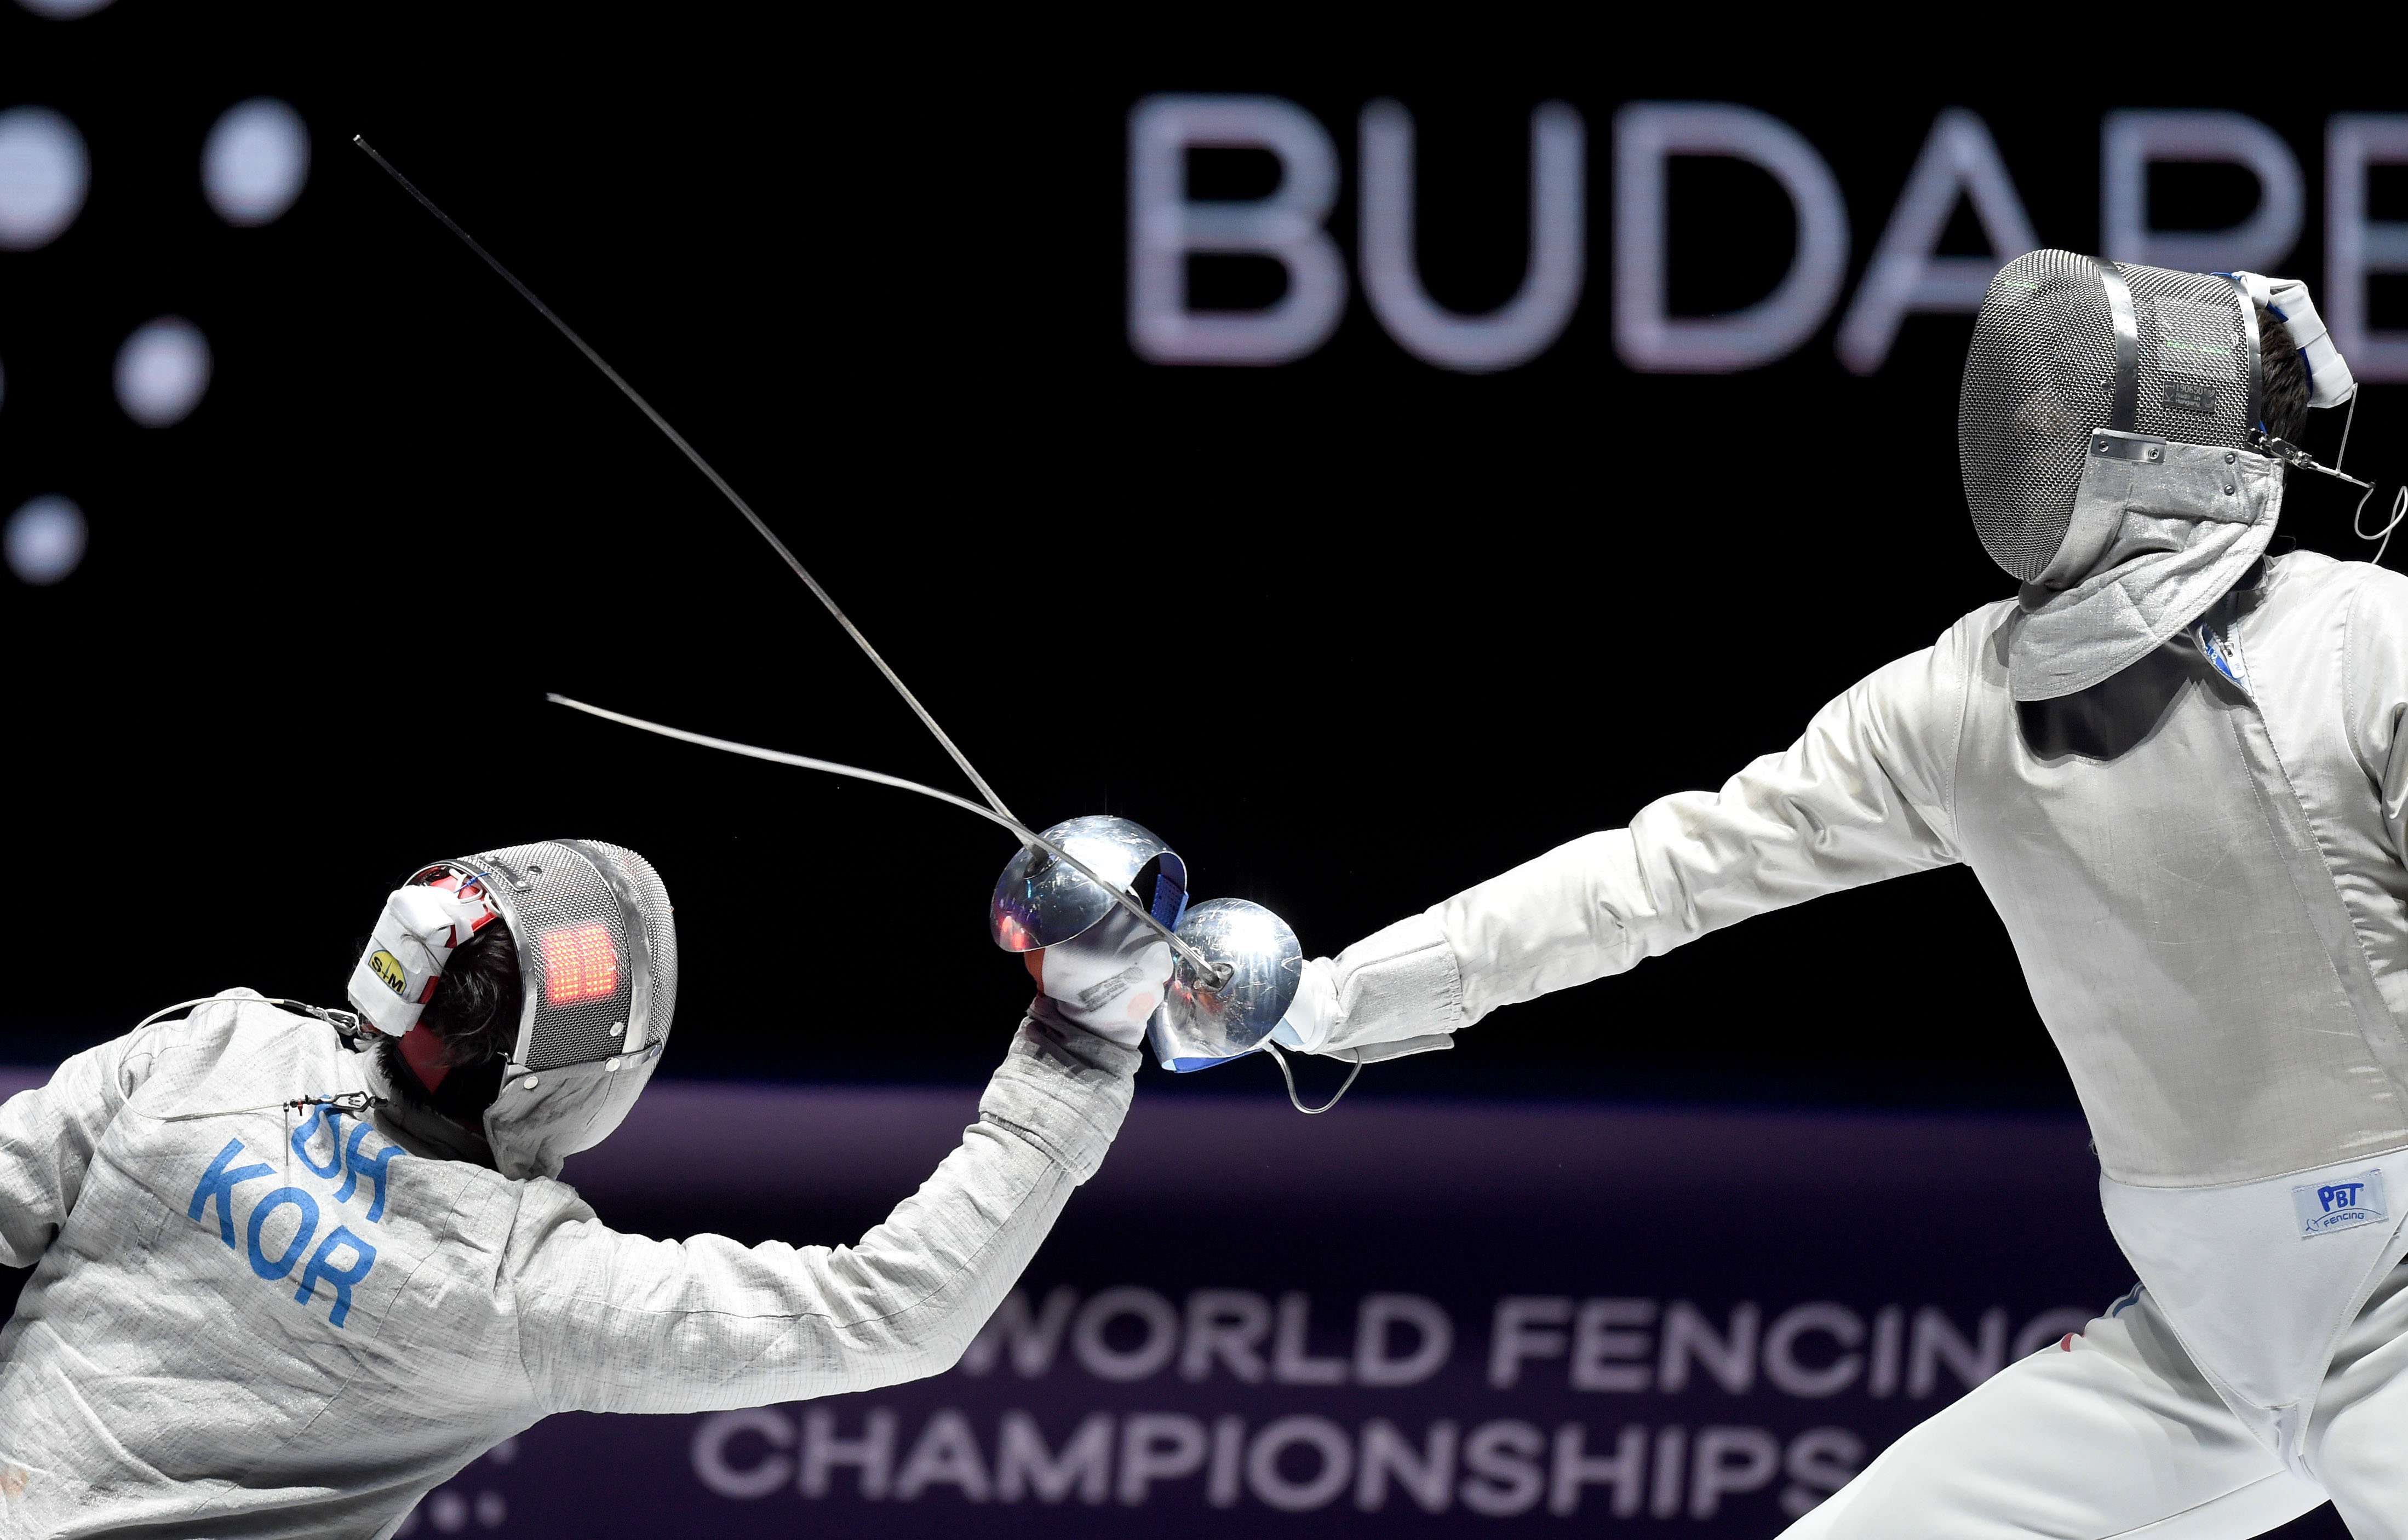 World Fencing Championships officially kick off with opening ceremony